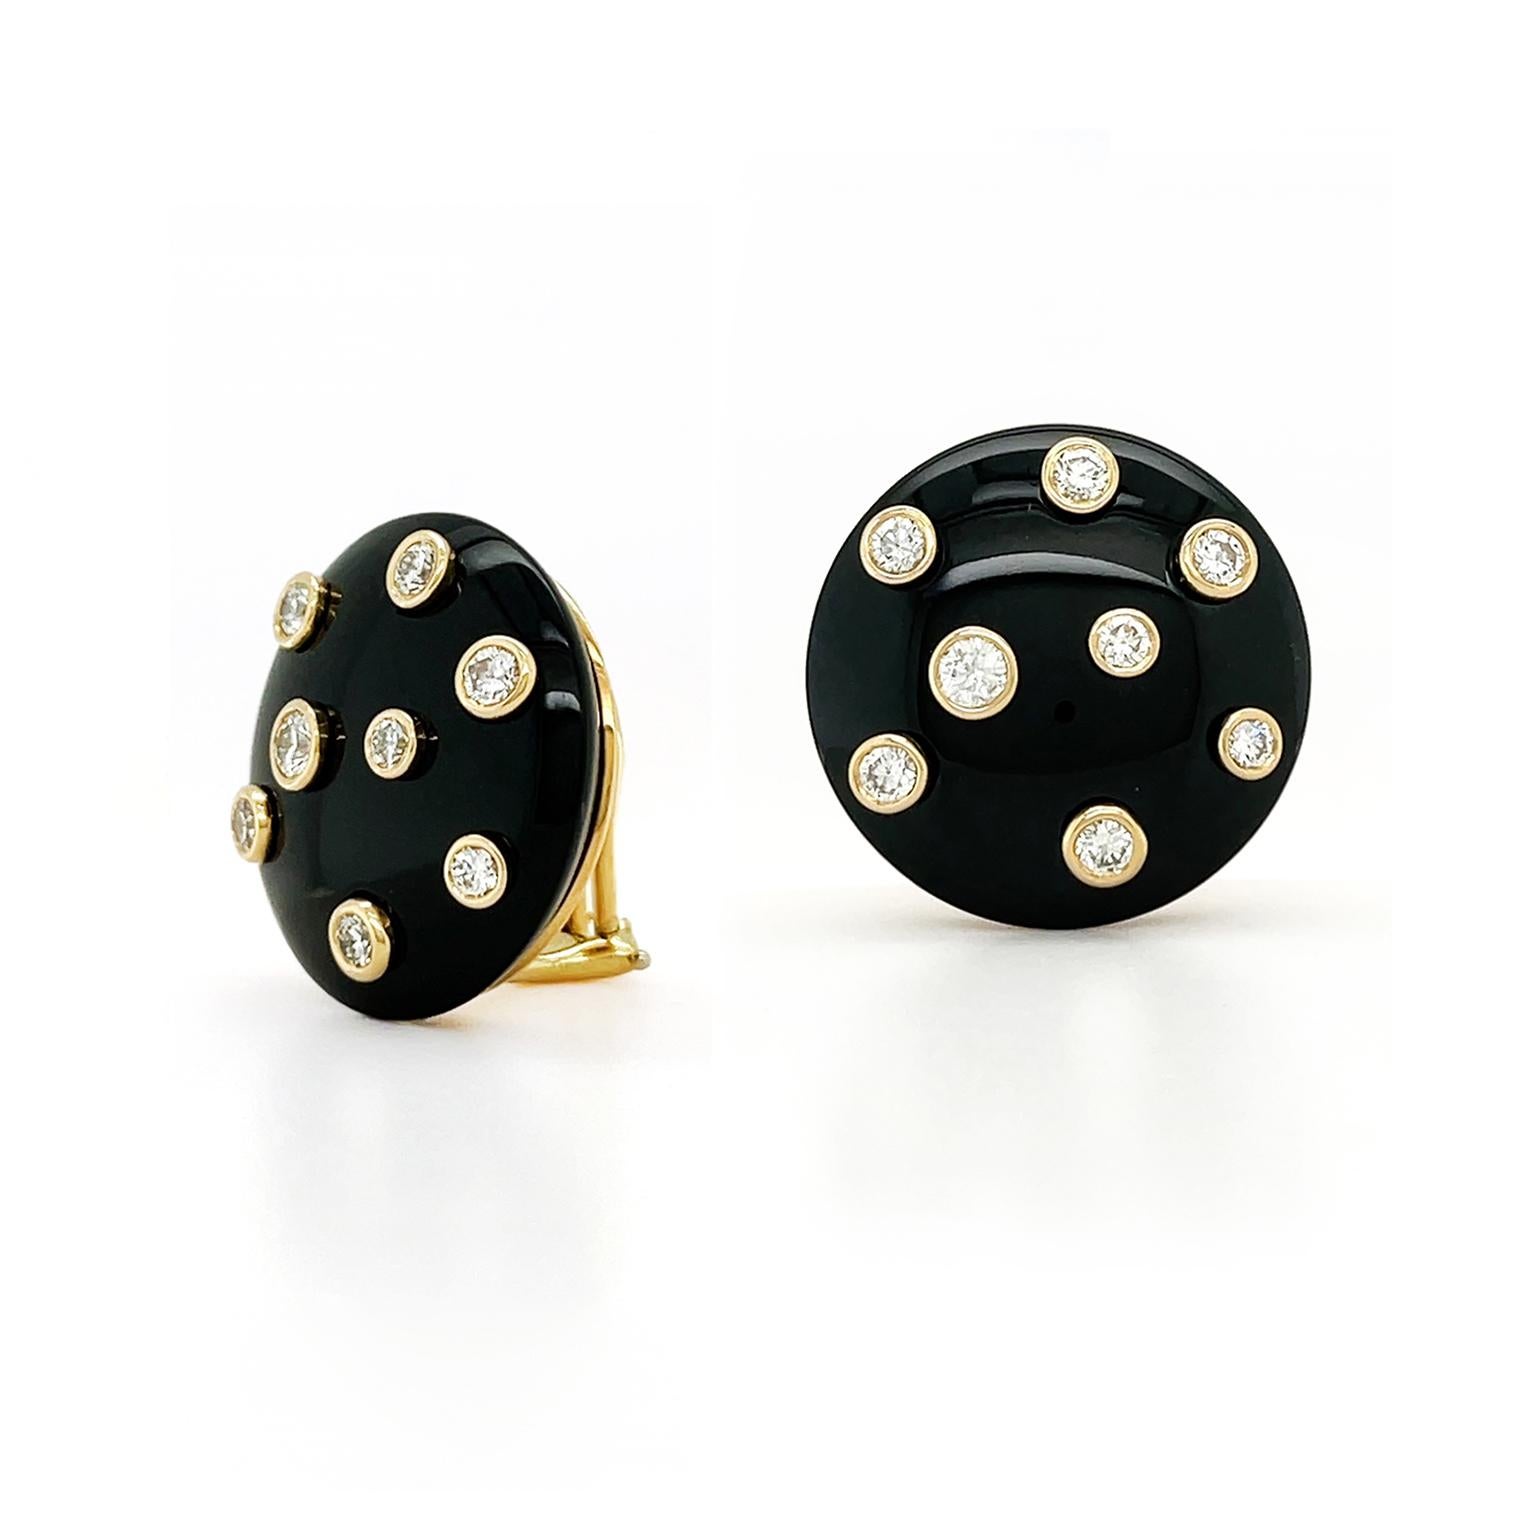 Flickers of sparkling light underline the depth of black jade for these earrings. A round cut with a soft dome of black jade is ornamented with a dispersed bezel set of brilliant-cut diamonds. The 18k yellow gold settings provide an additional touch